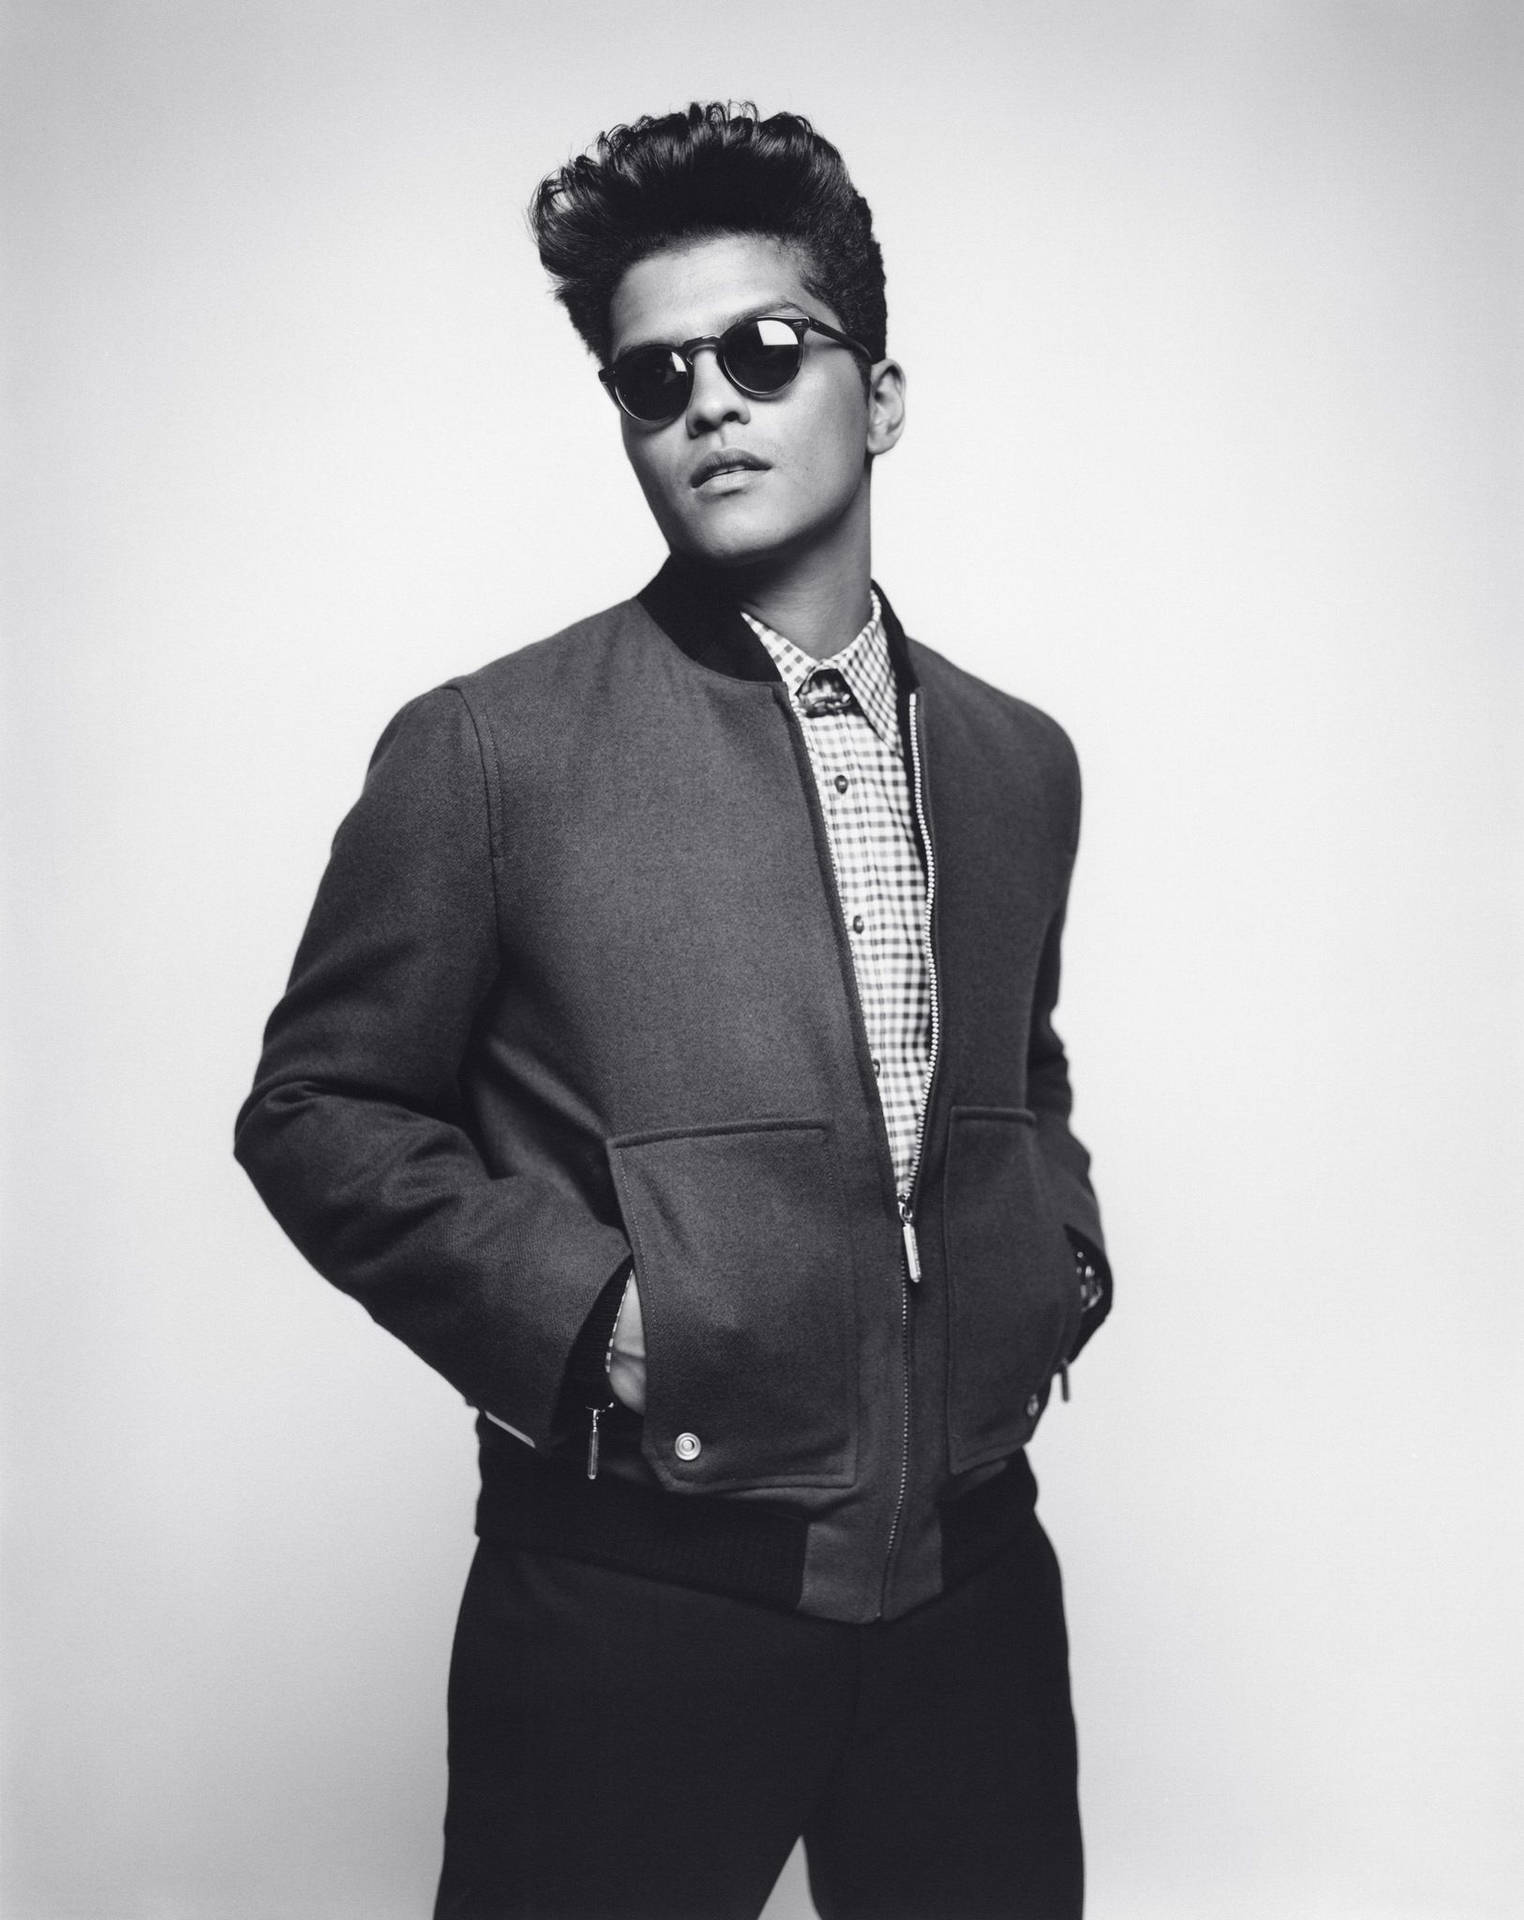 1626X2048 Bruno Mars Wallpaper and Background